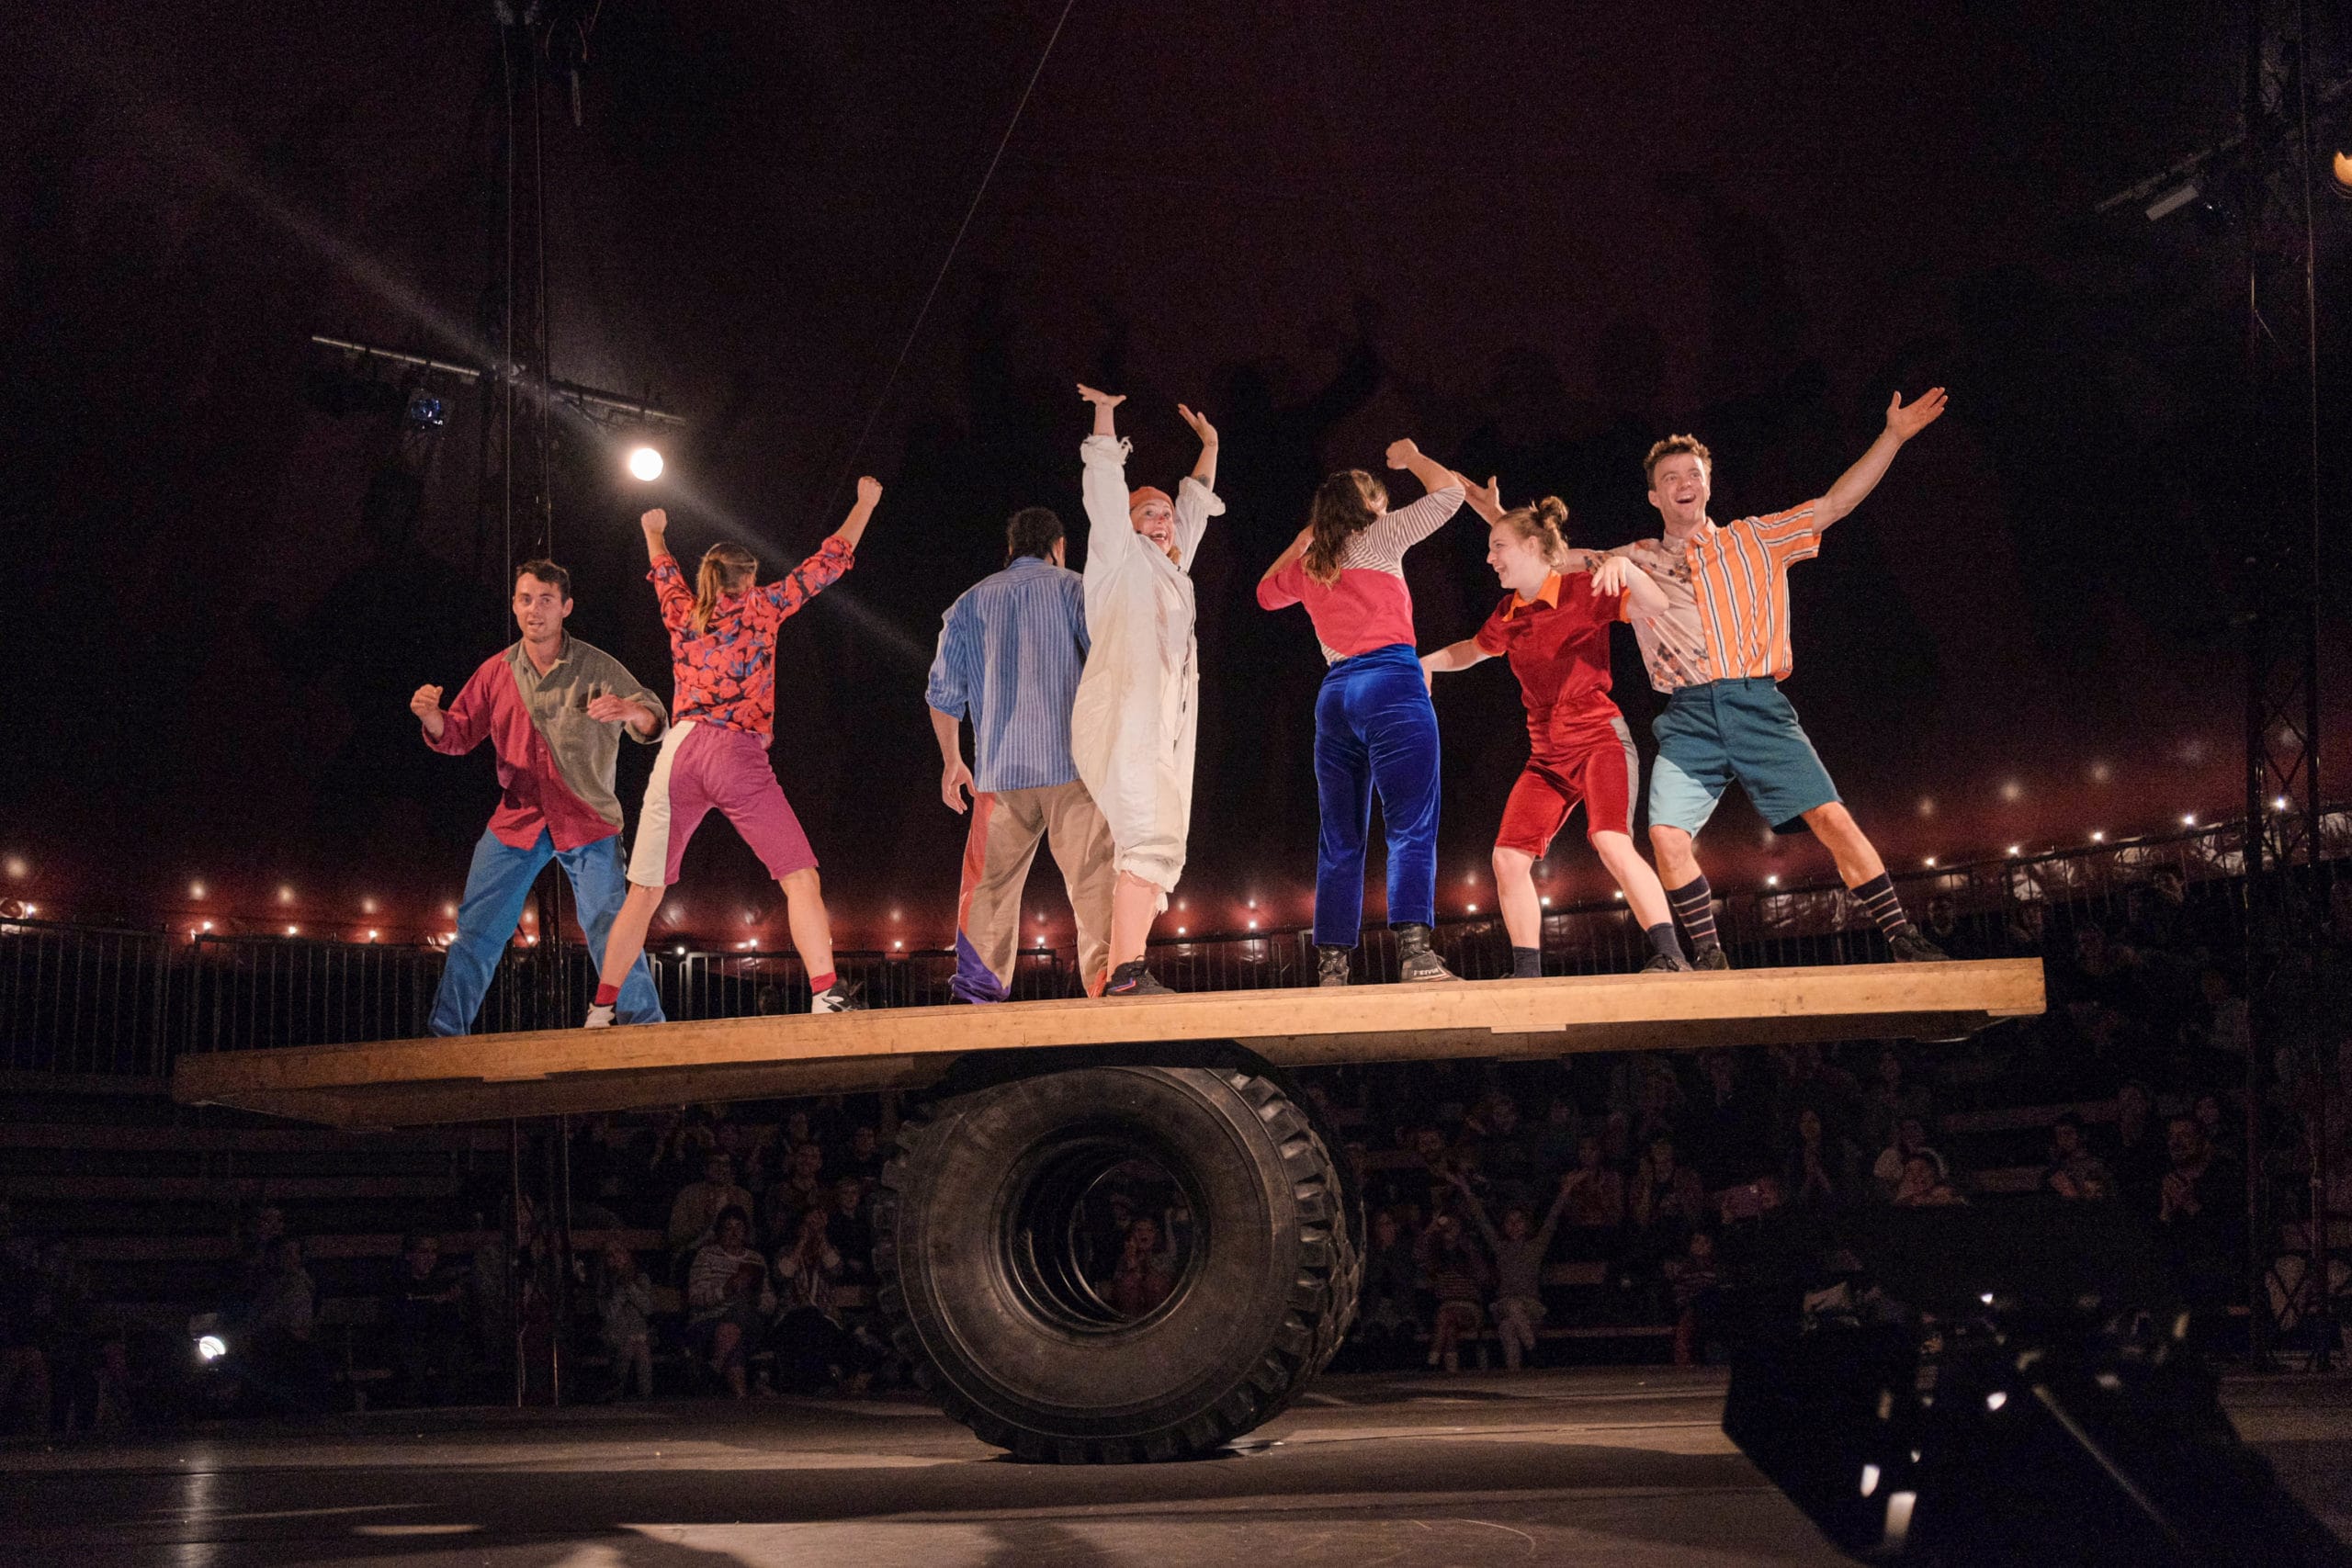 7 Revel Puck circus performers balance on top of a wooden seesaw, held up by an extra large large rubber tyre. They carefully balance to suspend the seesaw at an exact equilibrium. They are all wearing vibrant assorted circus-style costumes.